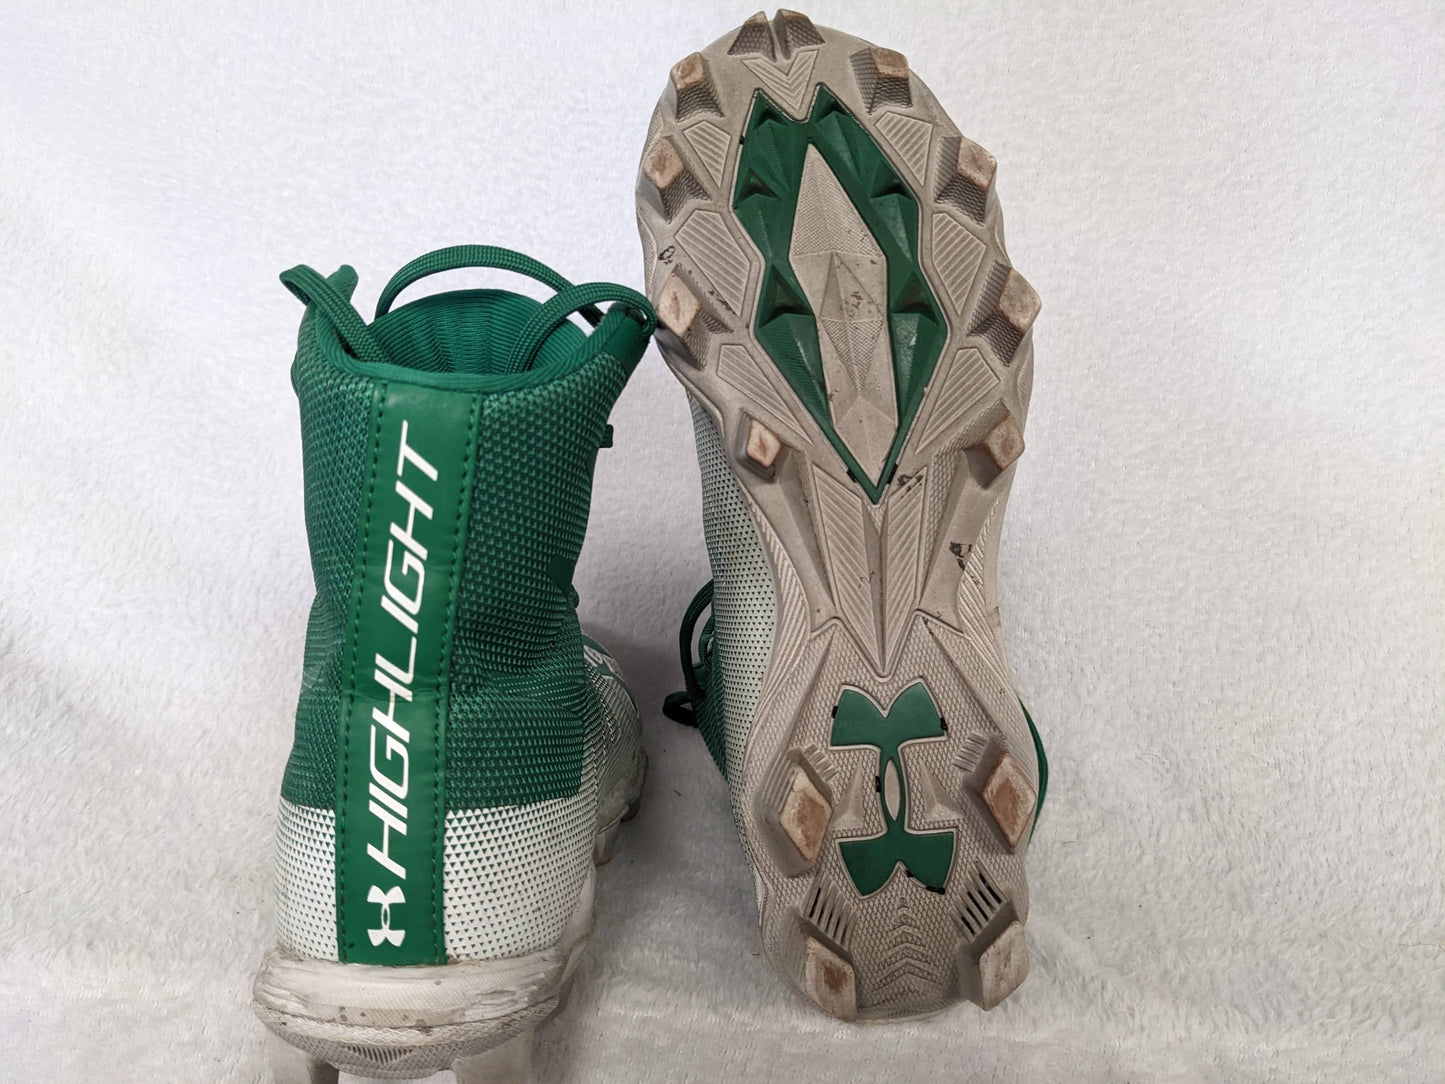 Under Armour Highlight High Top Cleats Size 5.5 Color Green Condition Used